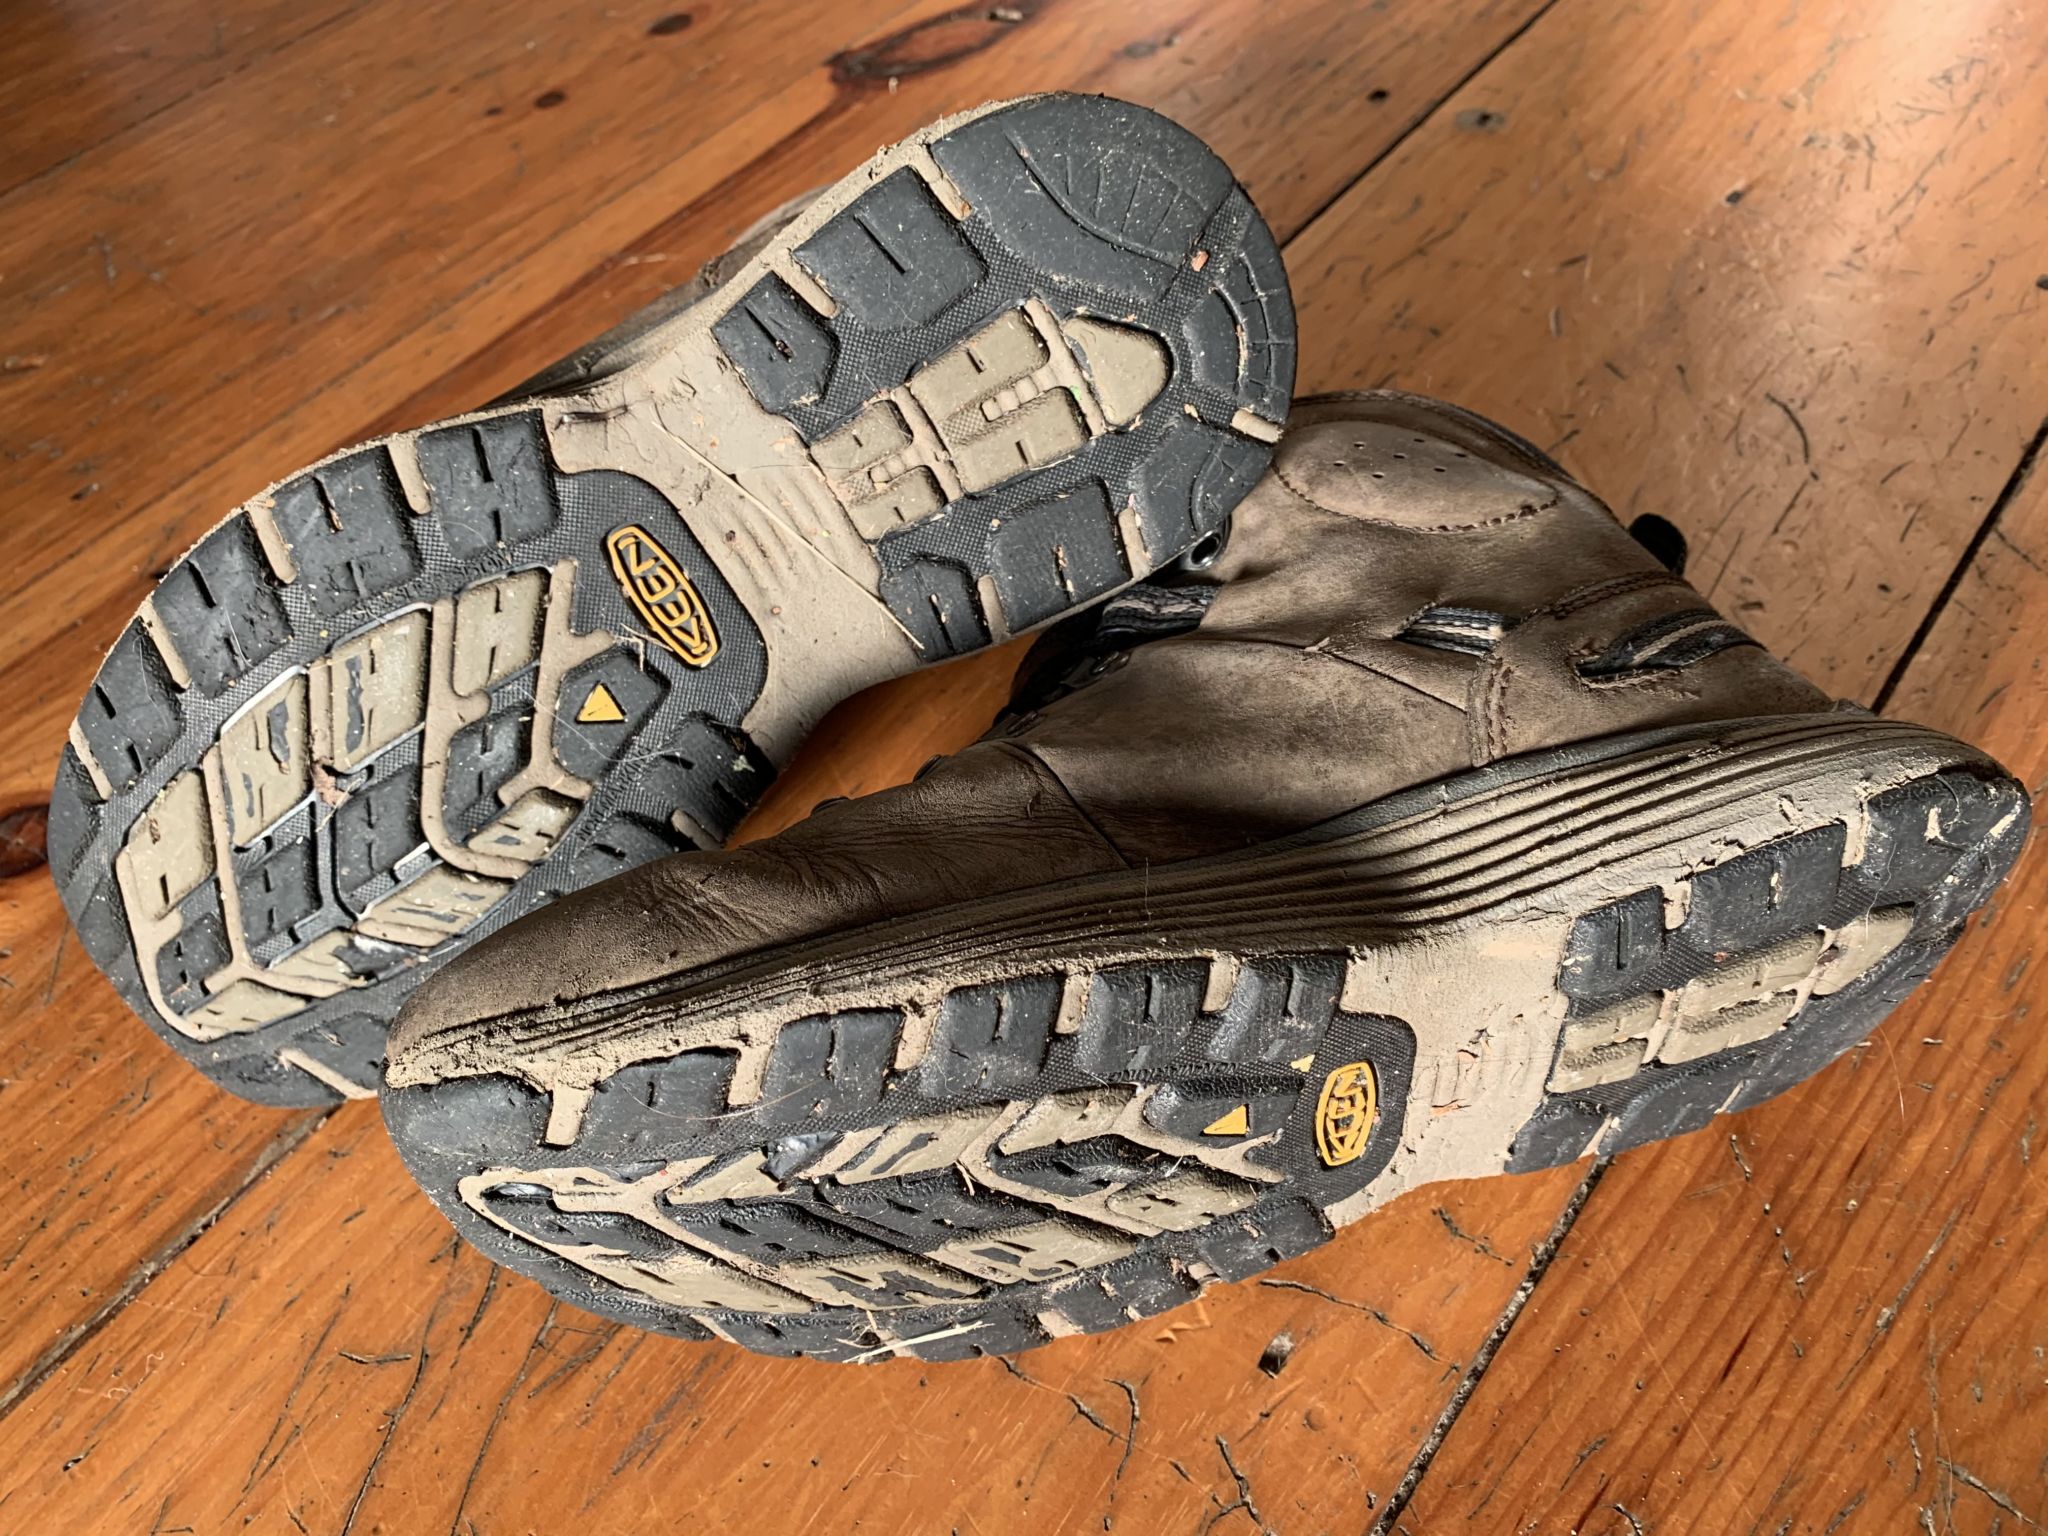 My jobsite boots: a review of KEEN Utility Manchester hikers